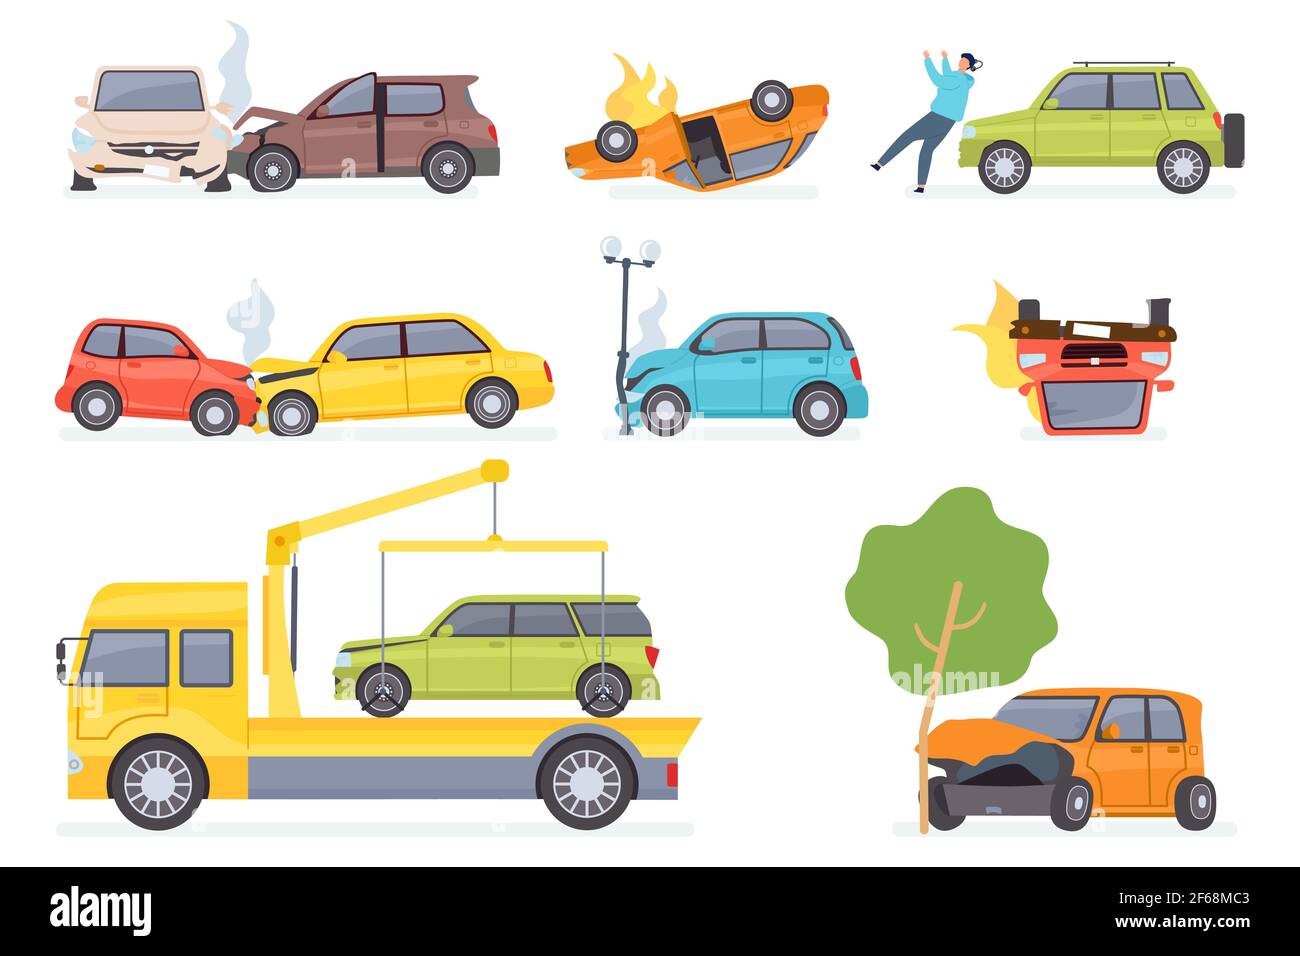 Cars accident. Insurance transportation on tow truck, auto collision with tree or street light, hitting pedestrian. Vehicle crash vector set Stock Vector